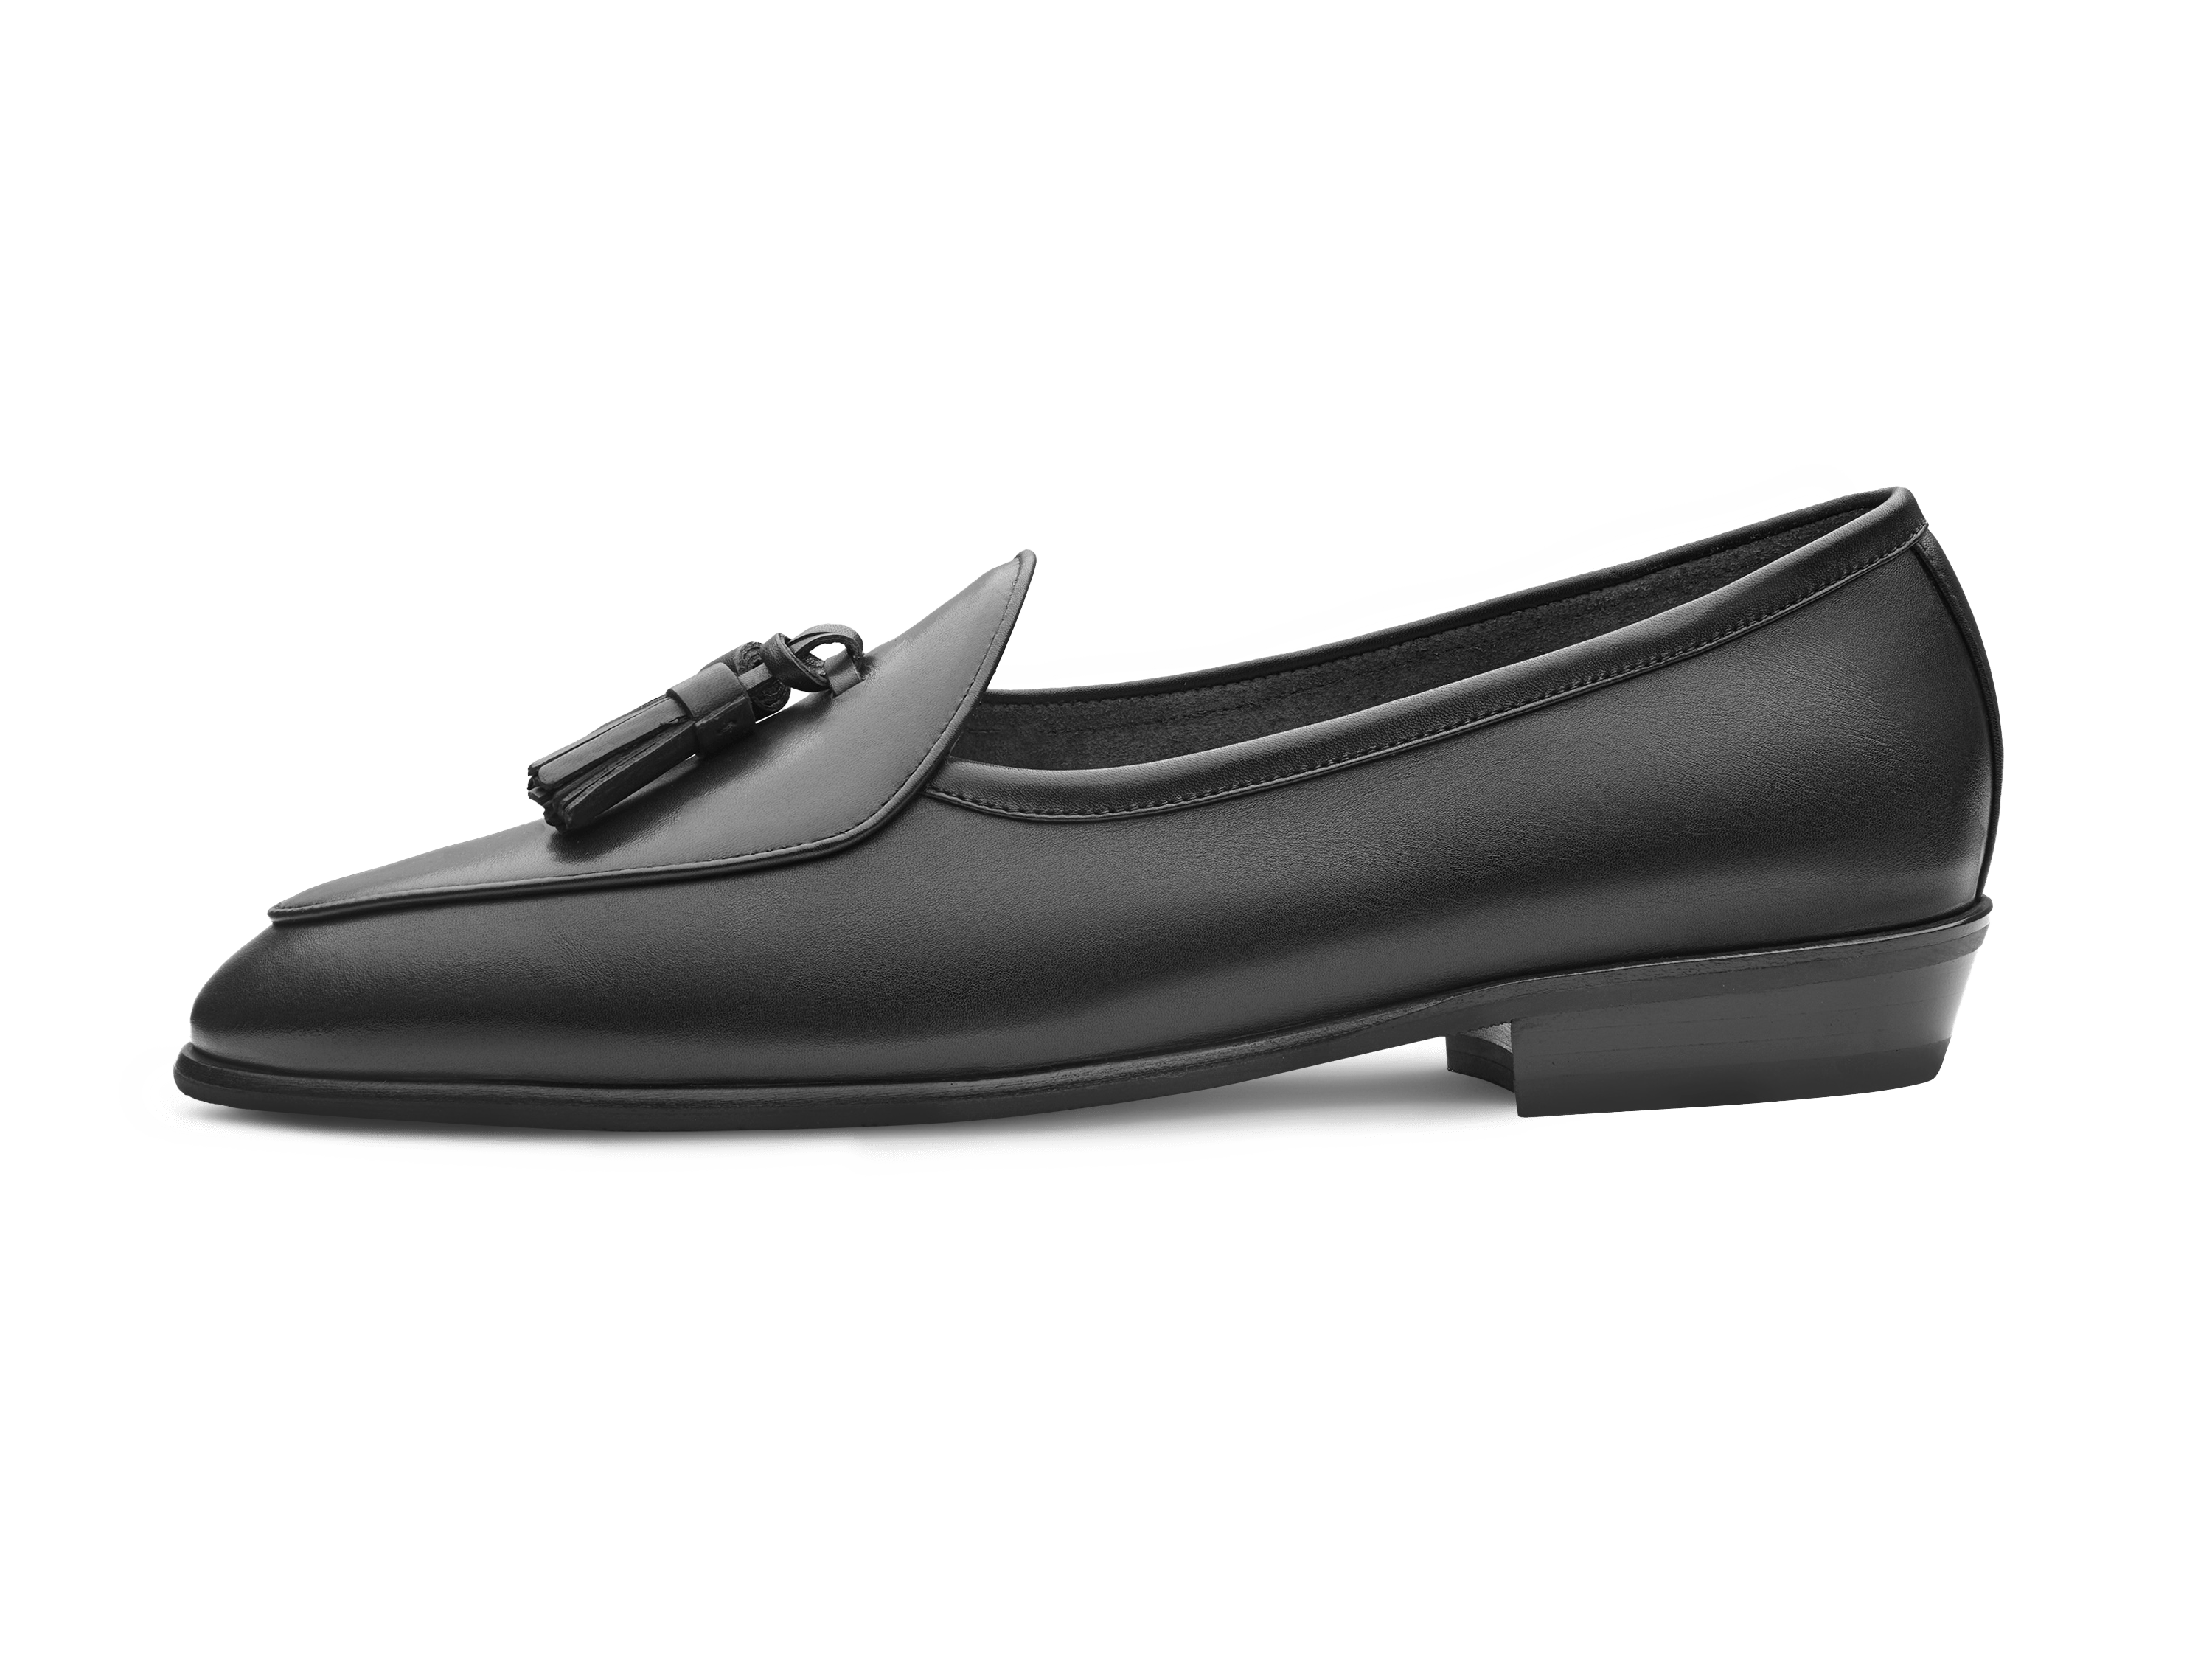 Sagan Classic Tassel Loafers in Black Drape Calf with Rubber Sole